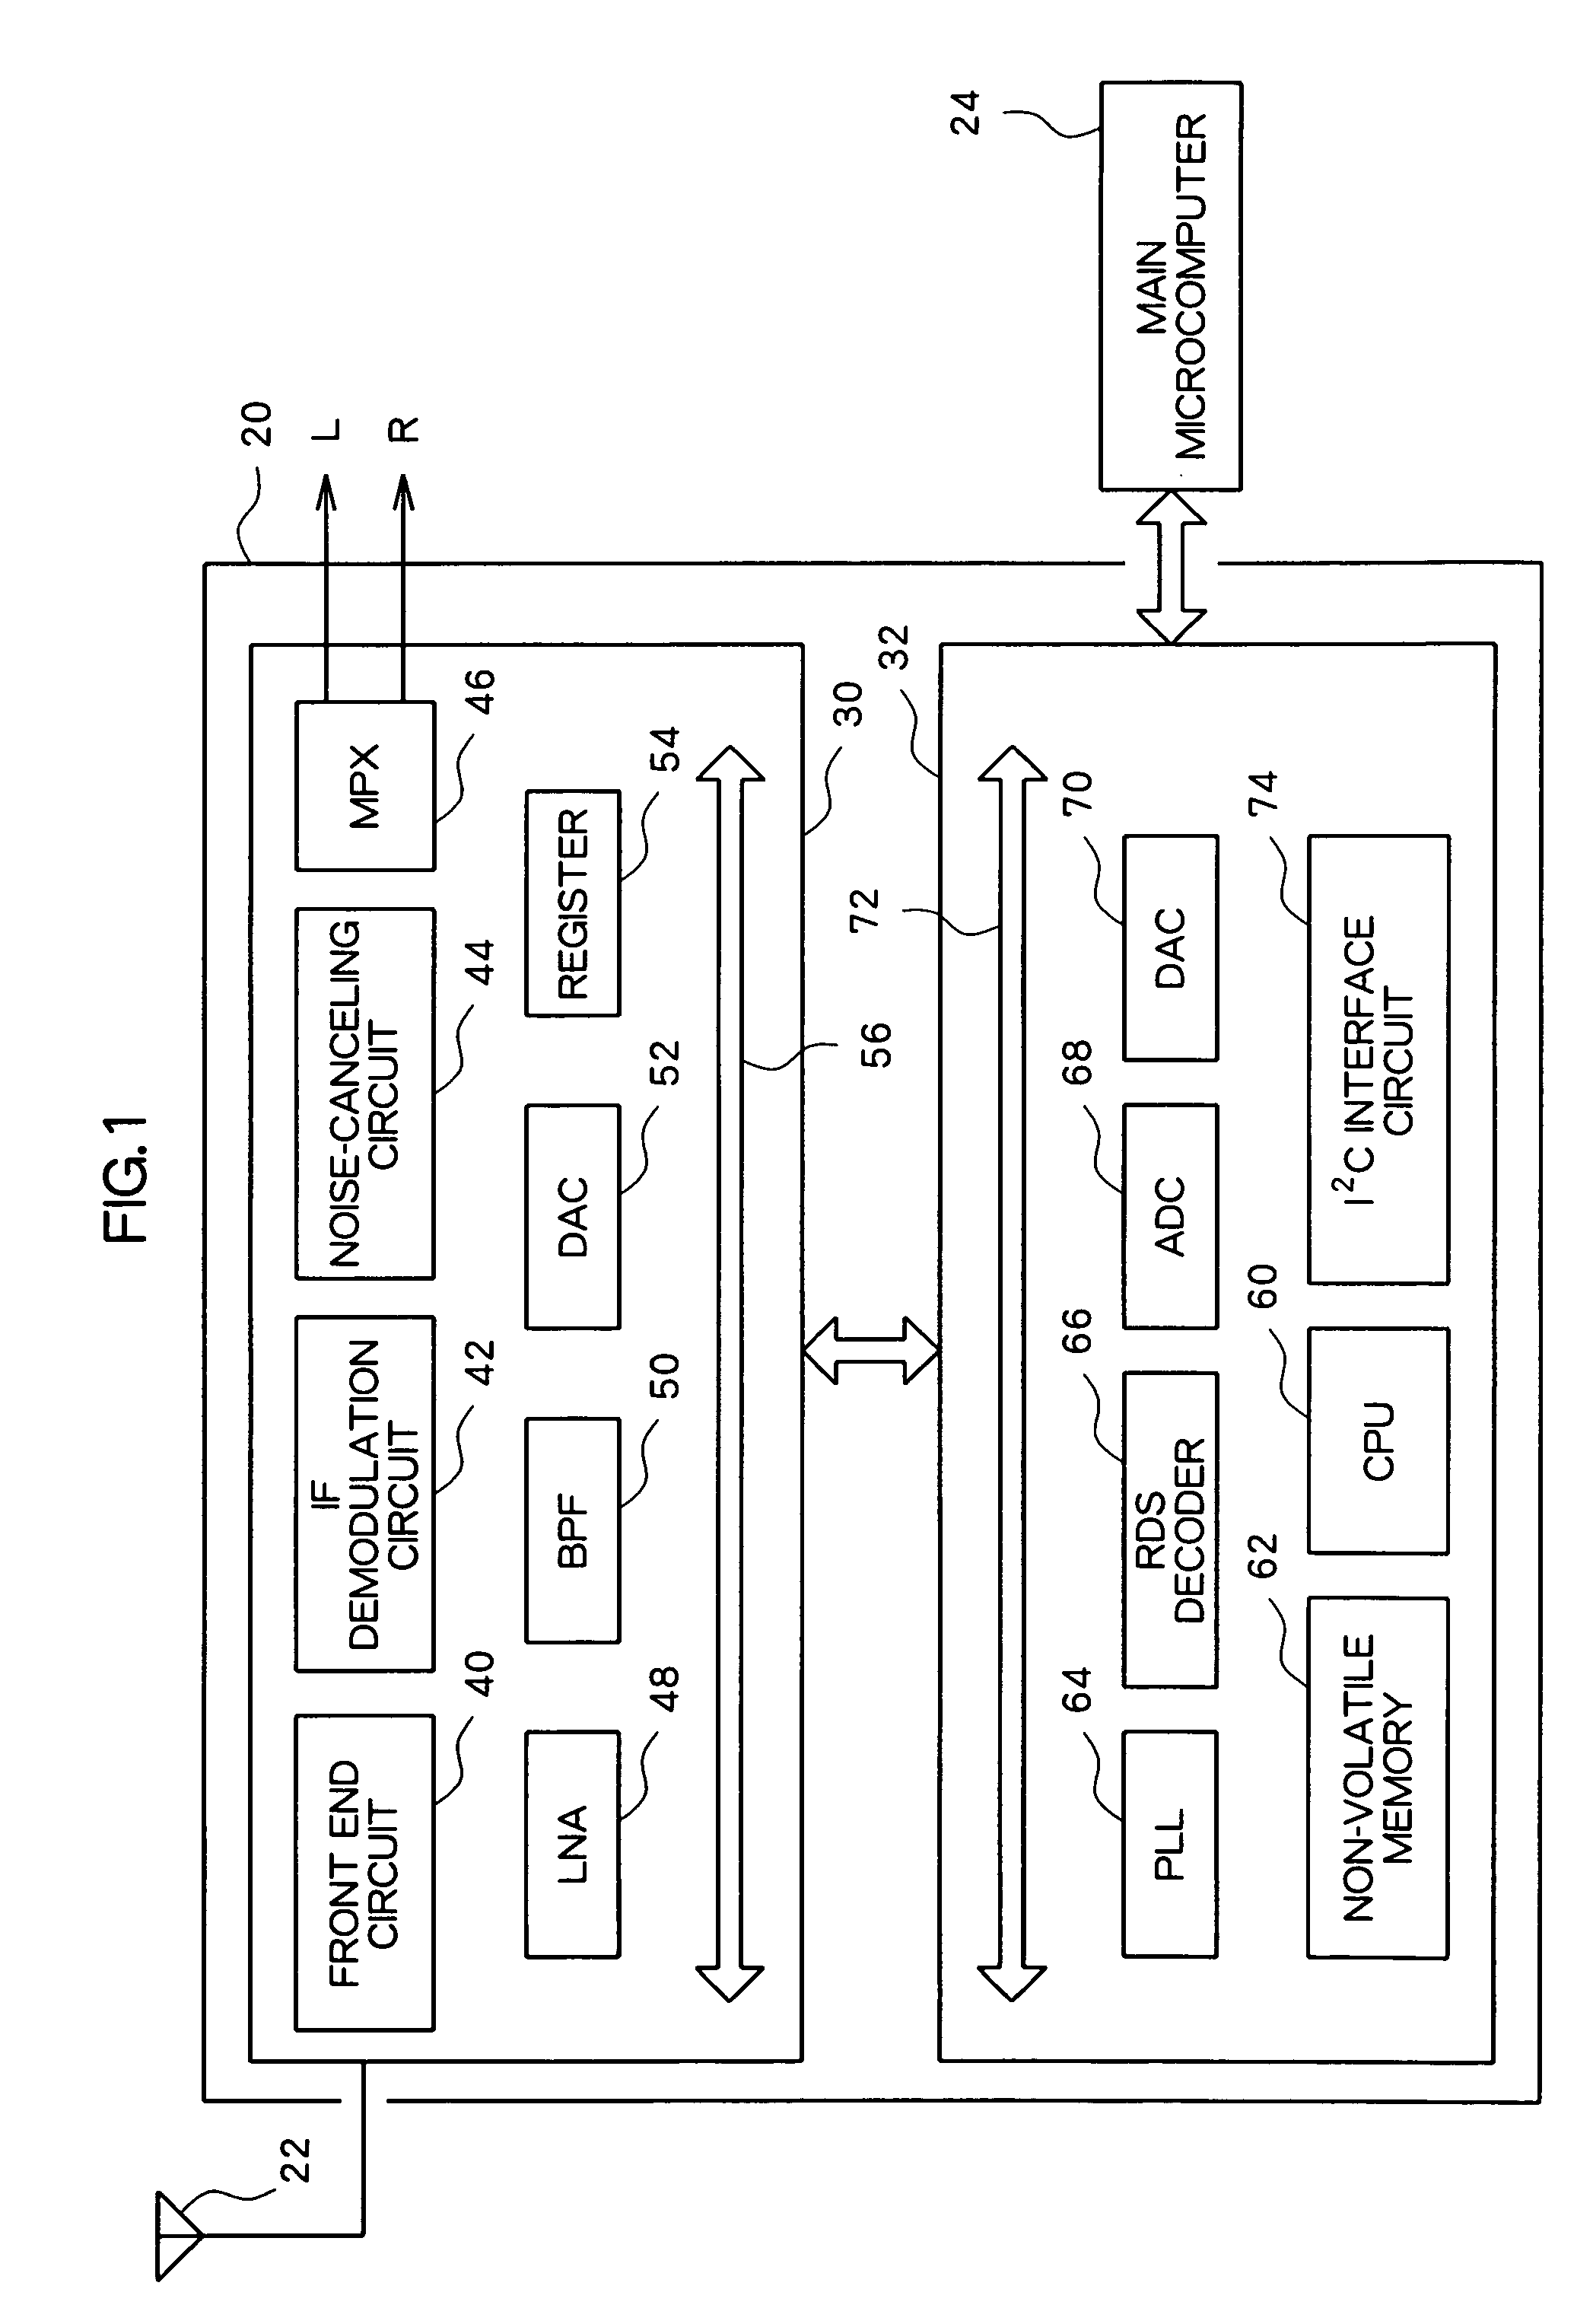 Semiconductor device for use in radio tuner and method for manufacturing the same